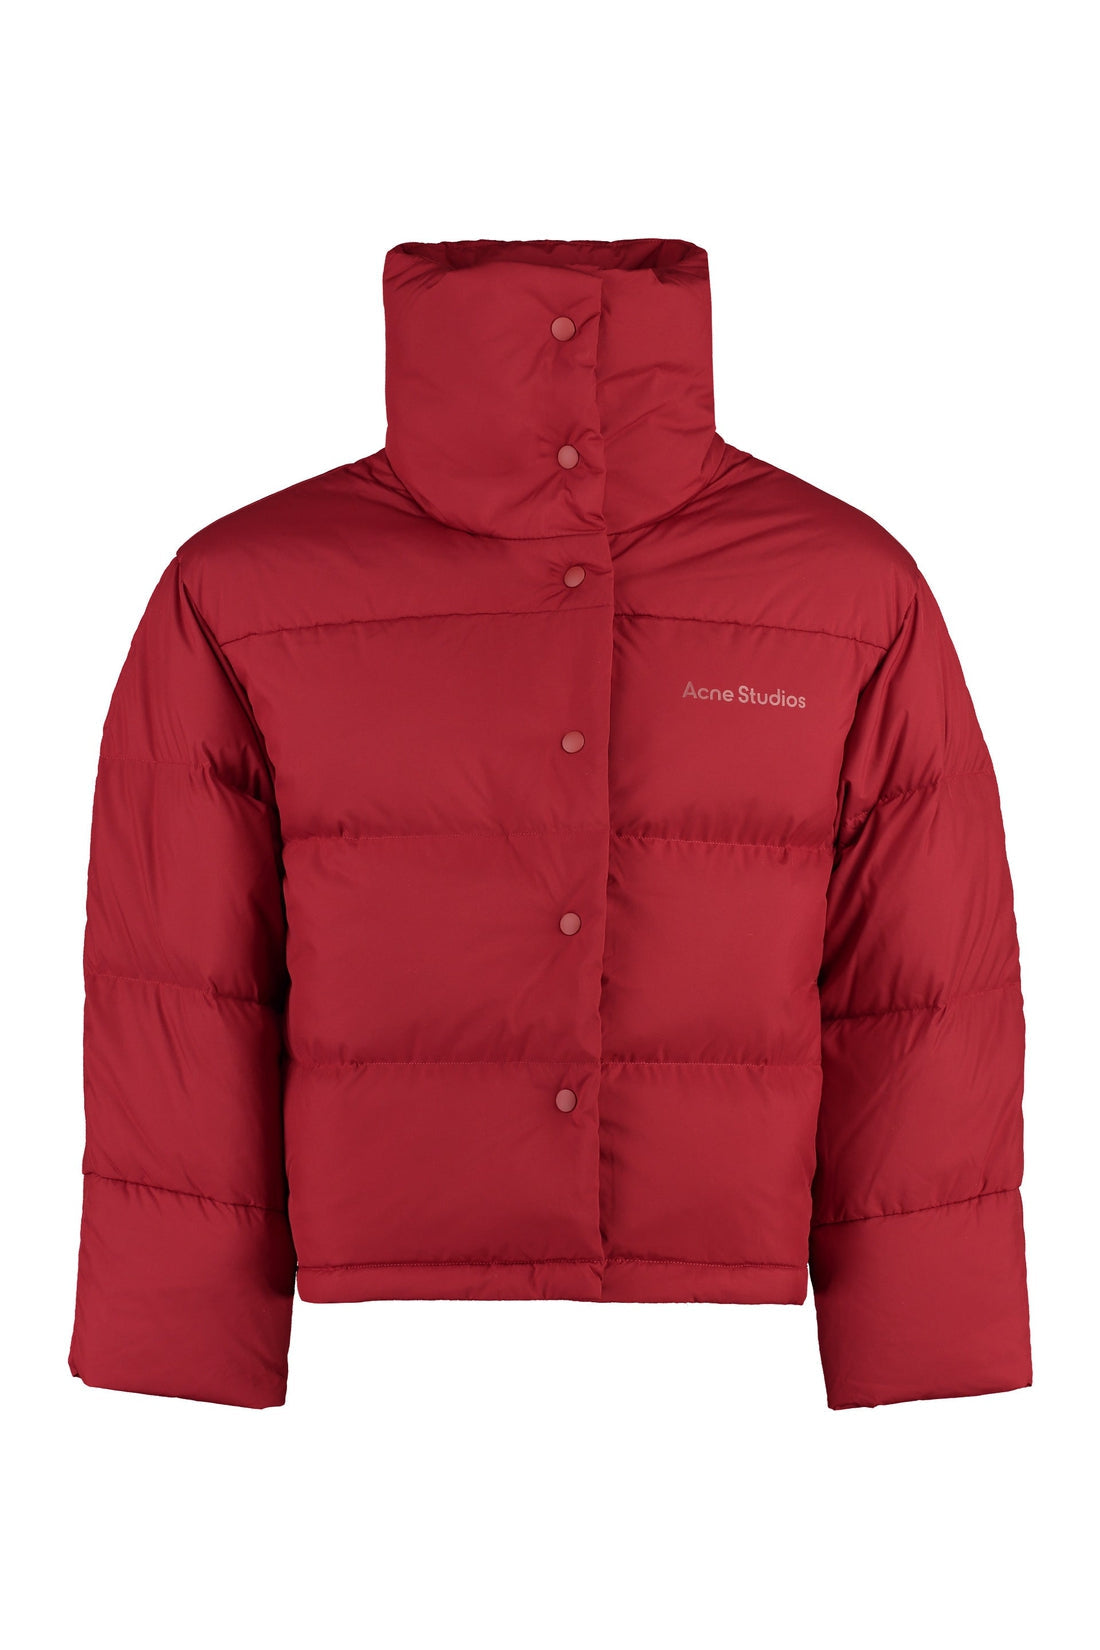 Acne Studios-OUTLET-SALE-Zip and snap button fastening down jacket-ARCHIVIST